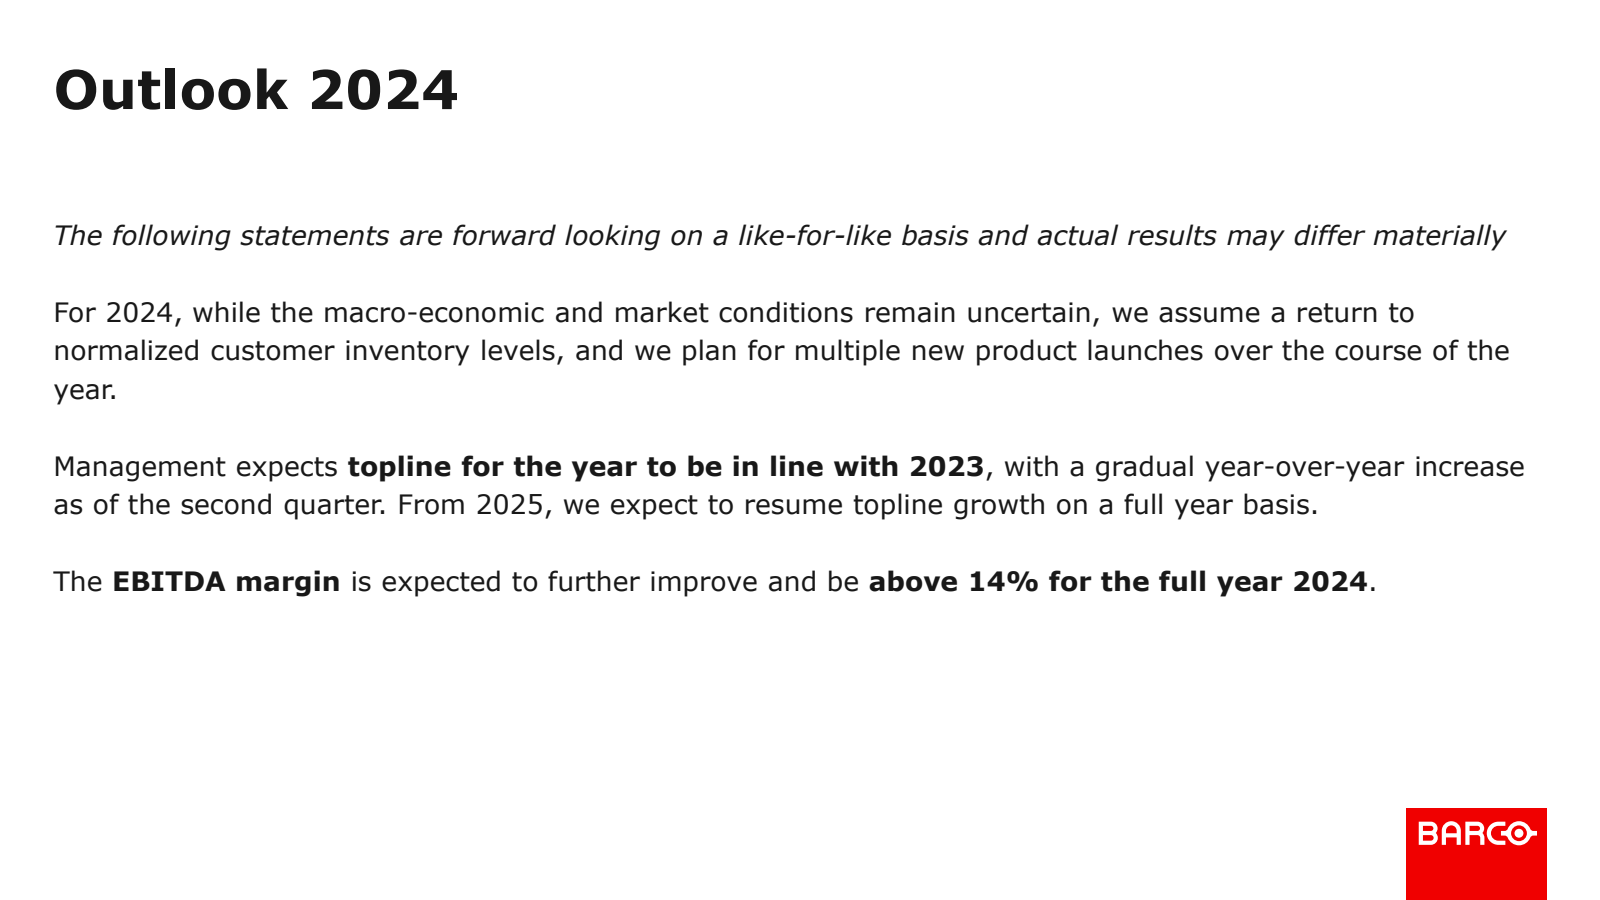 Outlook 2024 

The f